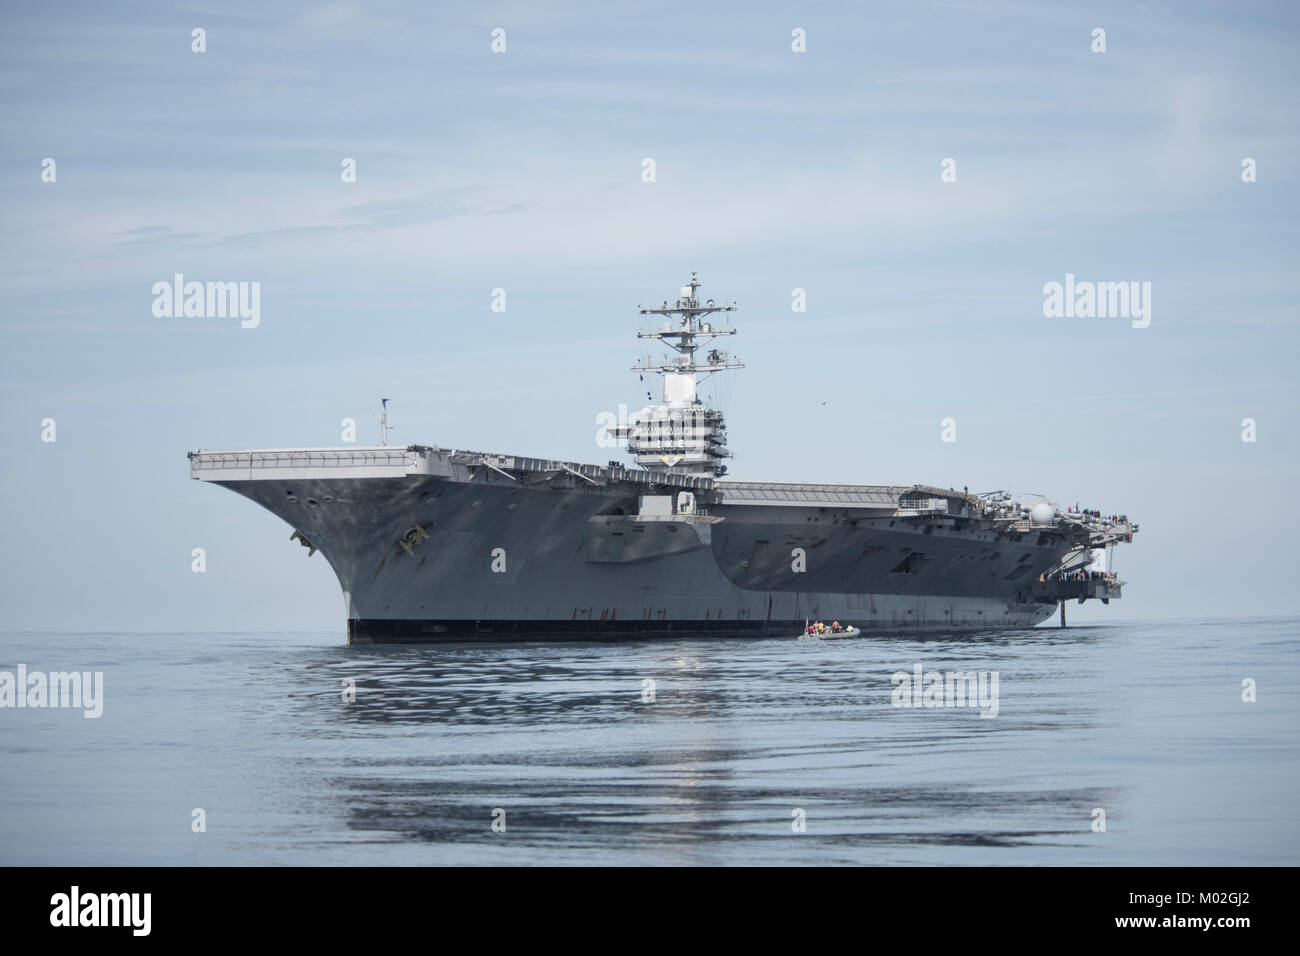 The aircraft carrier USS Dwight D. Eisenhower (CVN 69)(Ike) transits the Atlantic Ocean. Ike is underway during the maintenance phase of the Optimized Fleet Response Plan (OFRP). Stock Photo